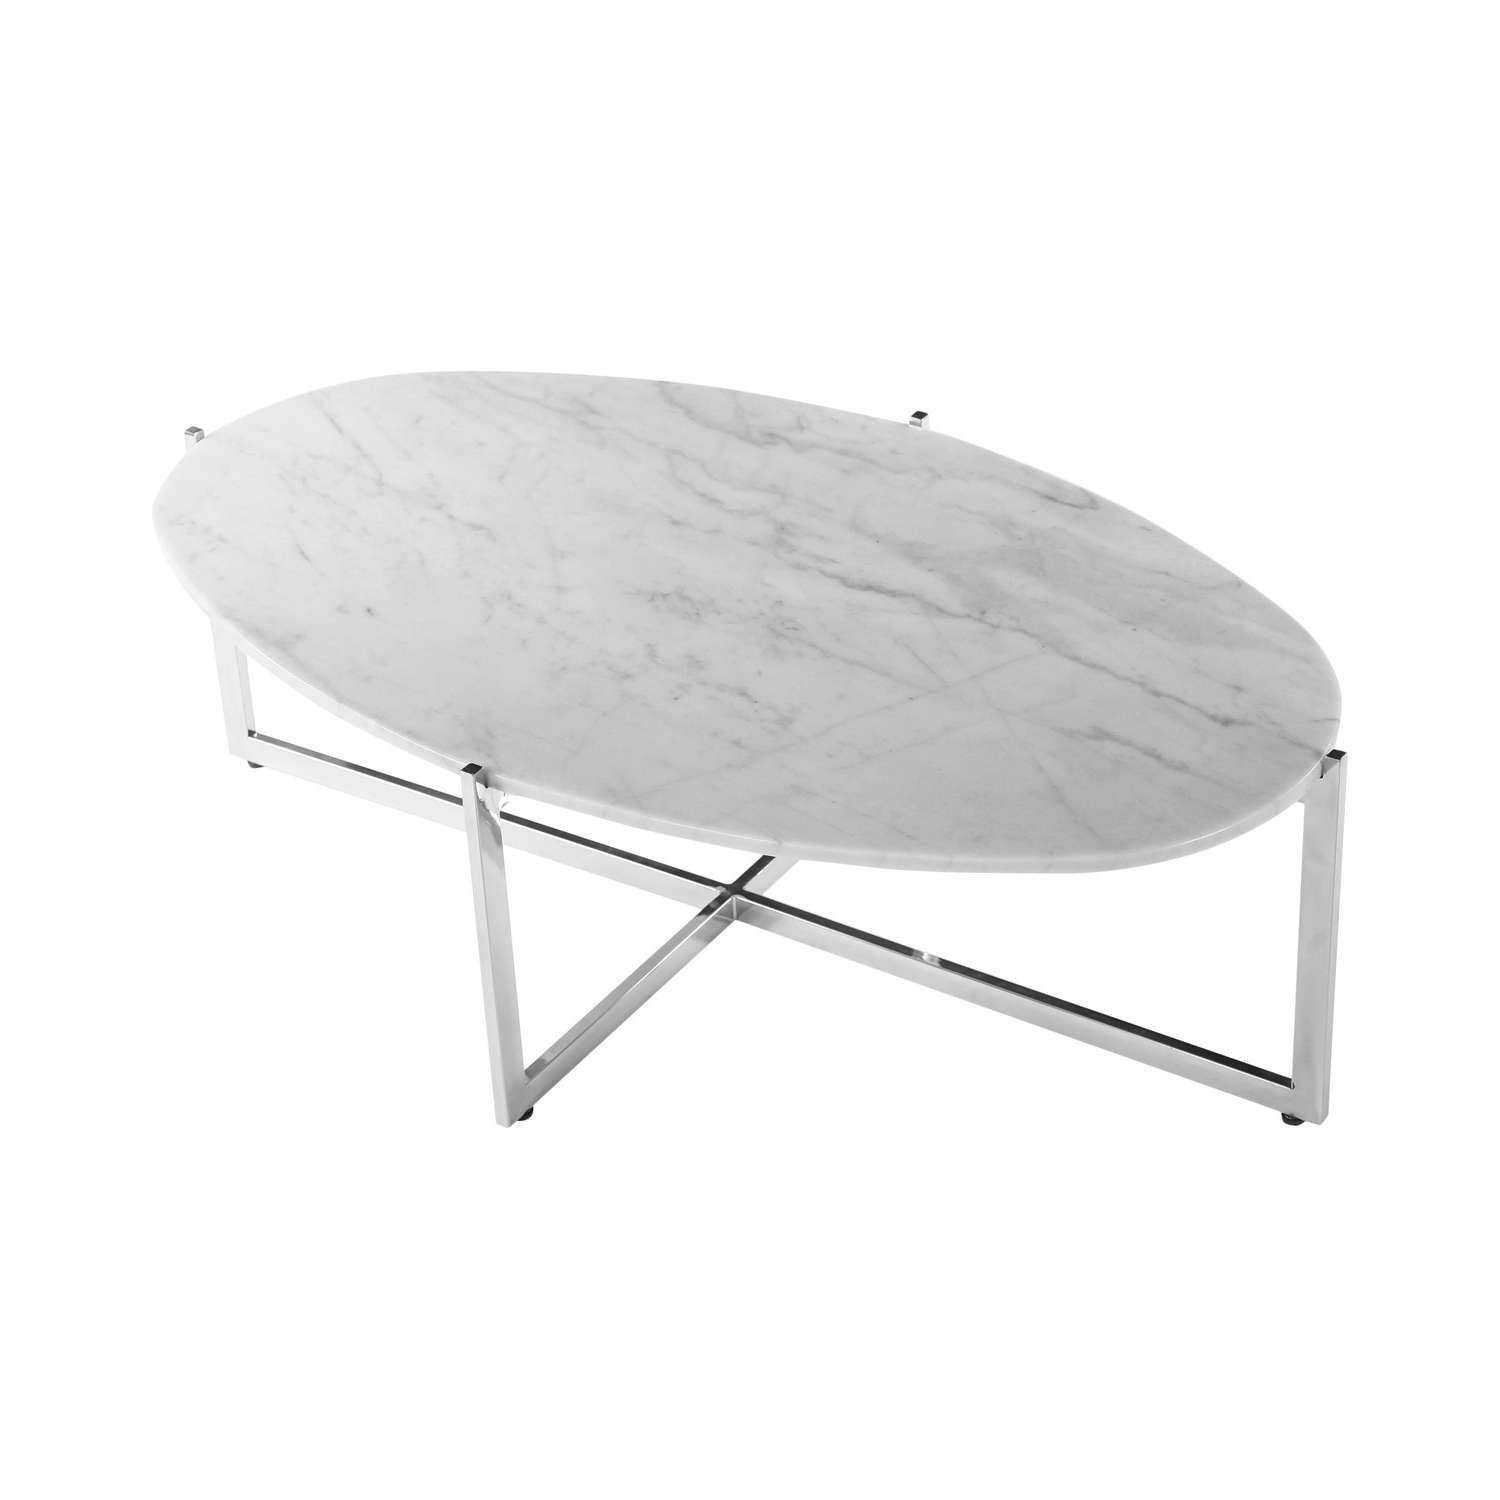 2017 Oval White Coffee Tables Intended For Coffee Tables : Faux Marble Coffee Table Top Accent Round Amazon (View 14 of 20)